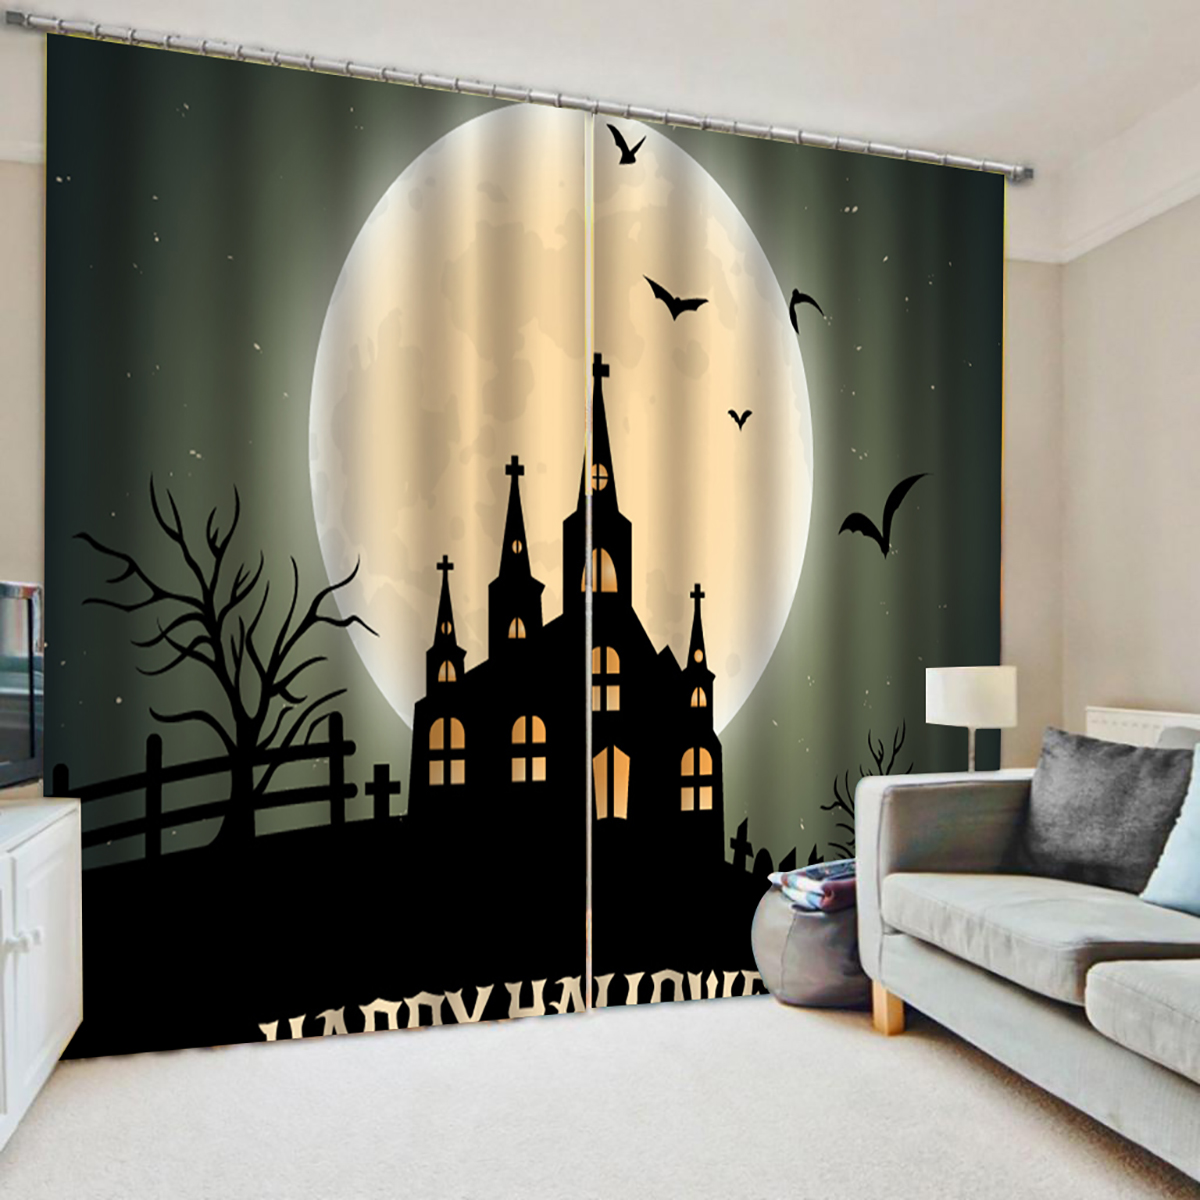 132160cm-Blackout-Window-Curtains-Halloween-Printed-Curtains-for-Living-Room-Festival-Decoration-1788701-2